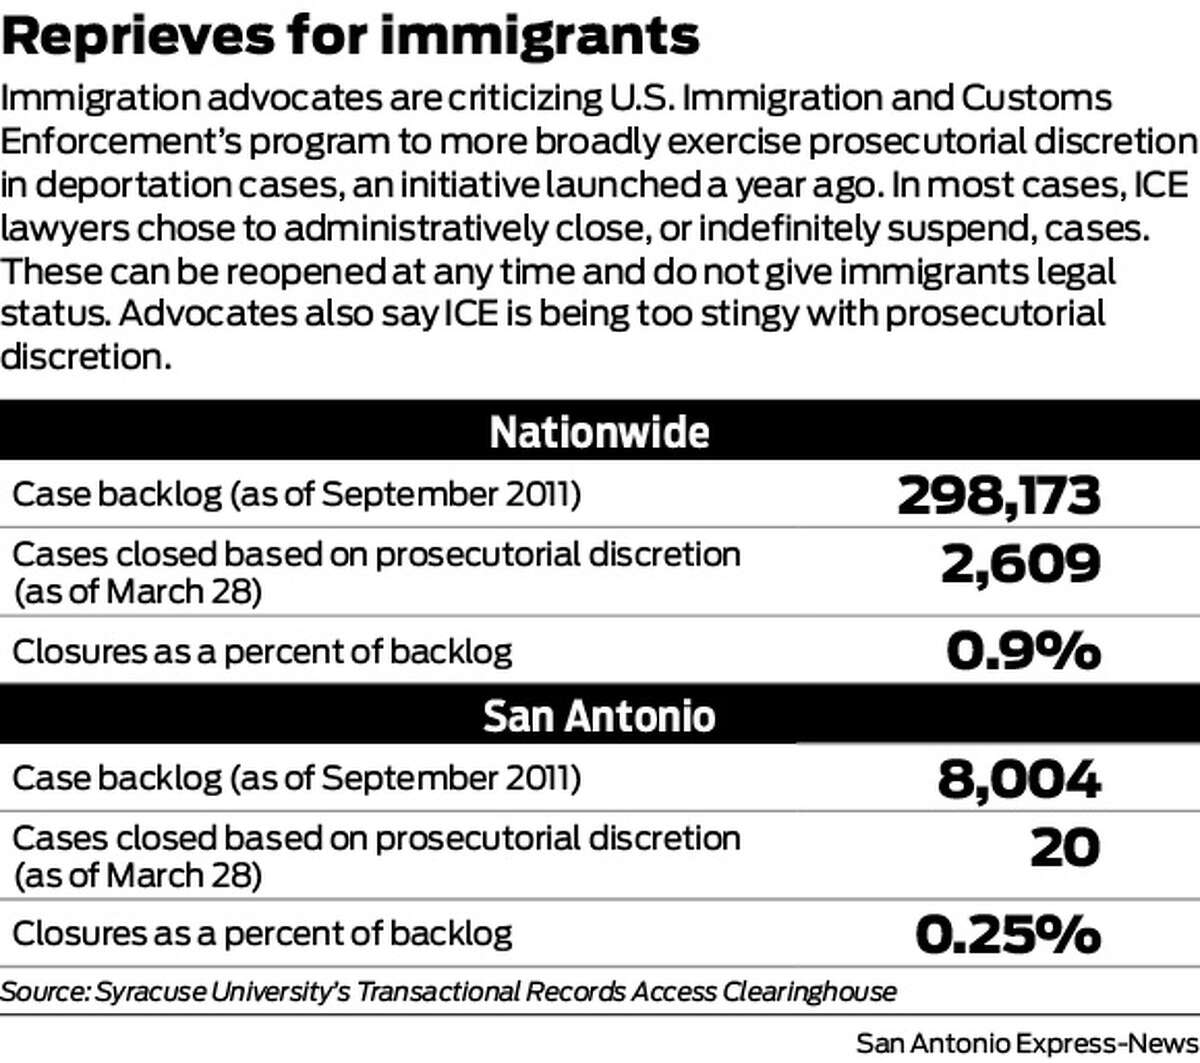   Immigration advocates are criticizing U.S. Immigration and Customs Enforcement’s program to more broadly exercise prosecutorial discretion in deportation cases, an initiative launched a year ago. In most cases, ICE lawyers chose to administratively close, or indefinitely suspend, cases. These can be reopened at any time and do not give immigrants legal status. Advocates also say ICE is being too stingy with prosecutorial discretion.  